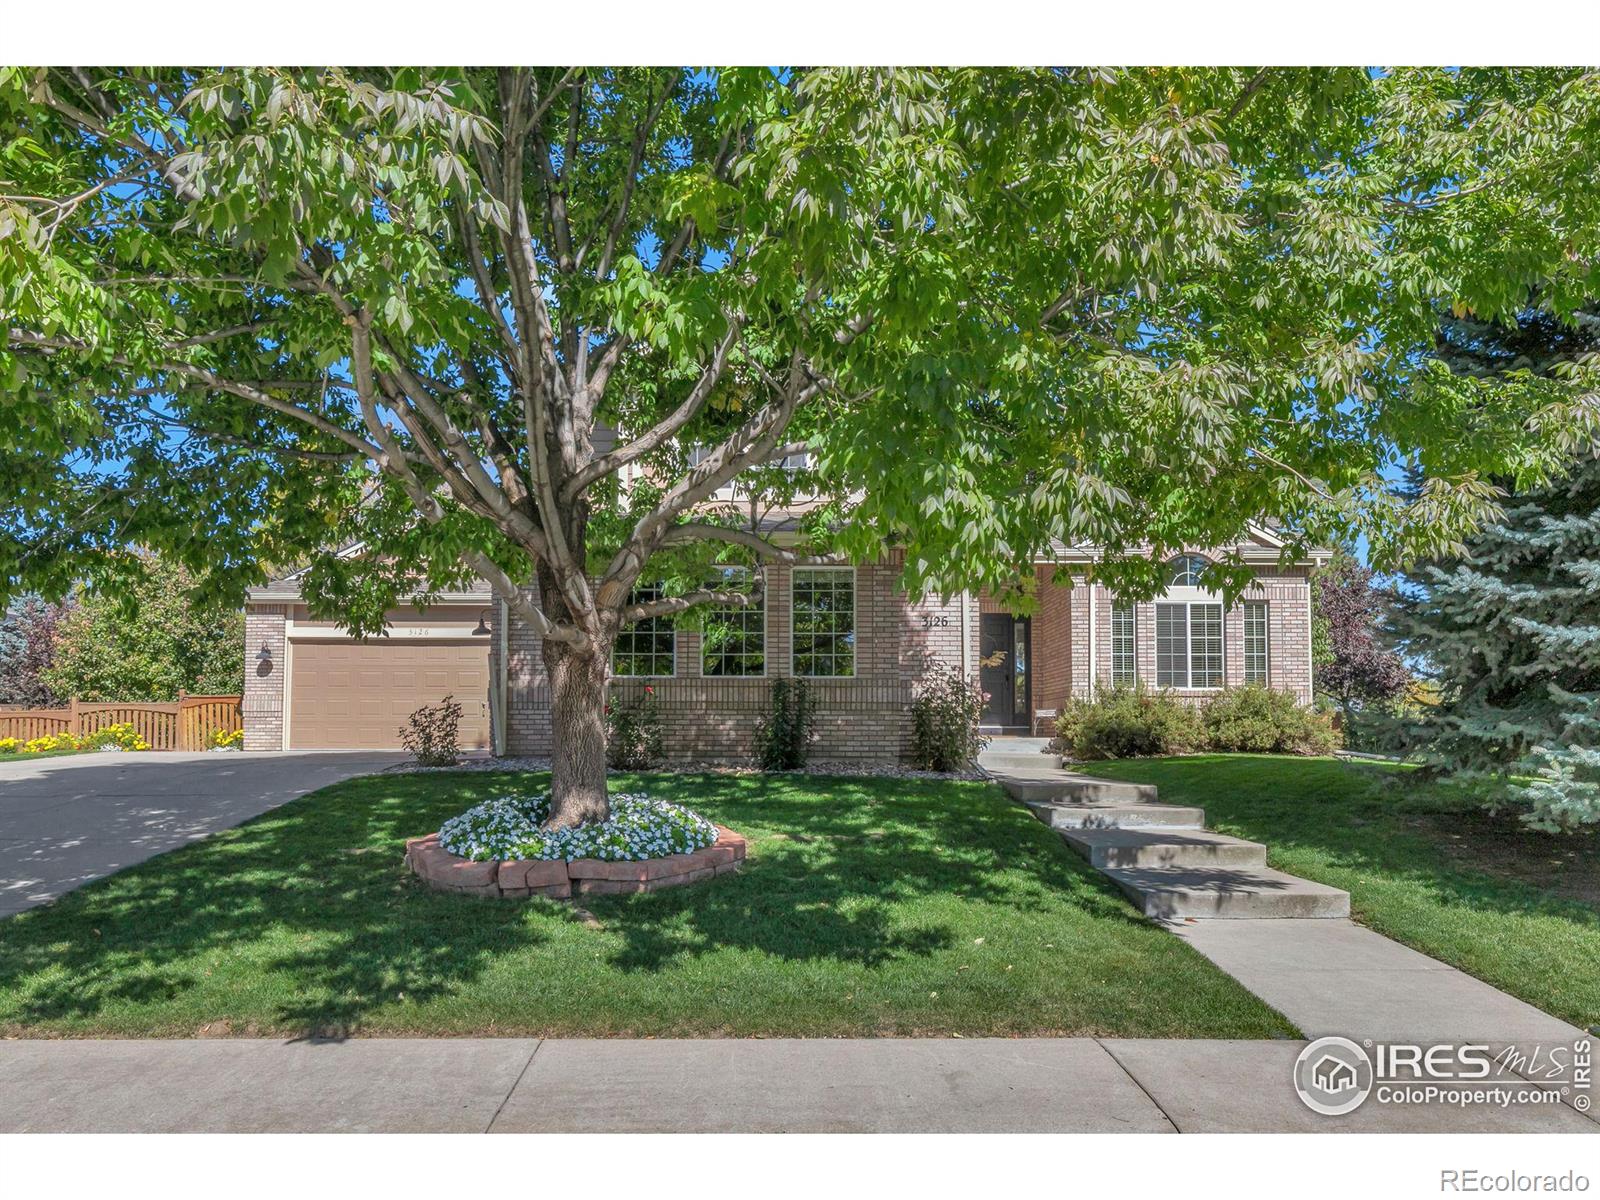 3126  mesa verde street, Fort Collins sold home. Closed on 2024-02-16 for $825,000.